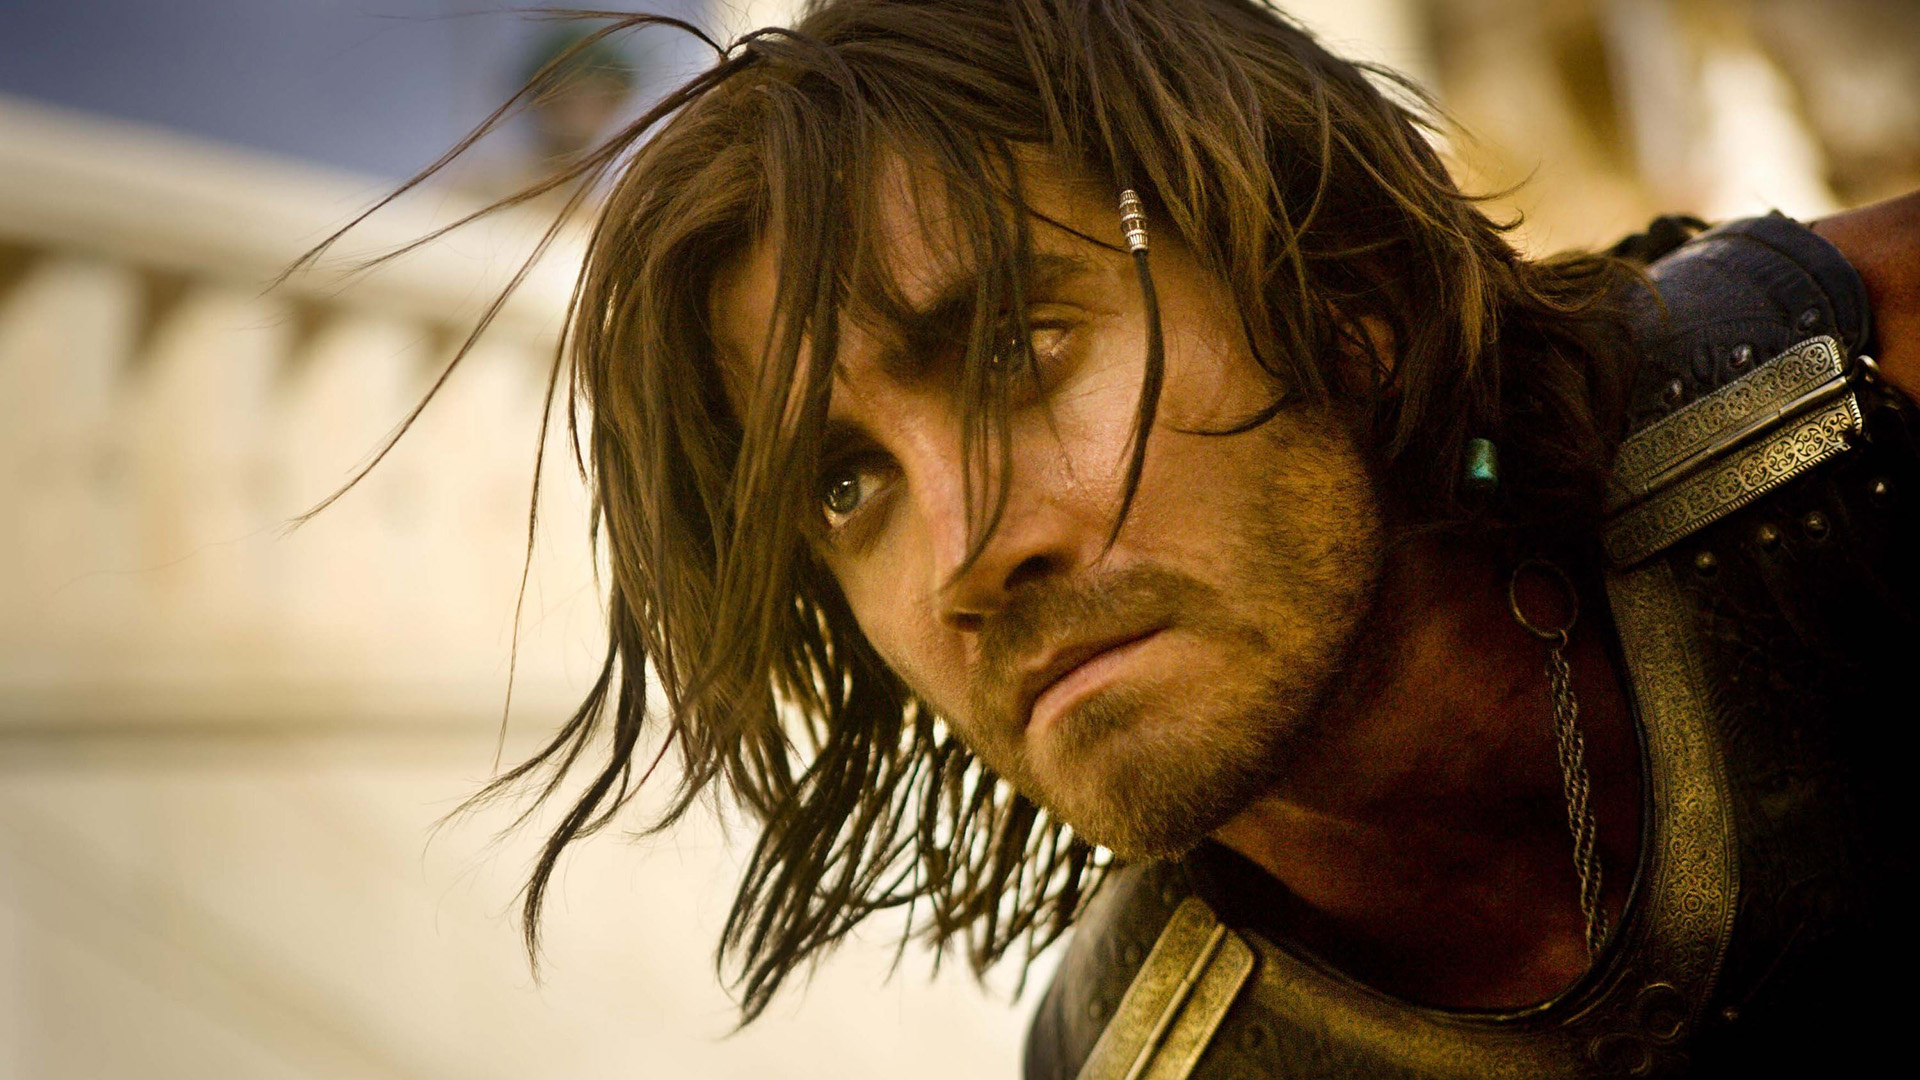 5 Jake Gyllenhaal Movies That Will Leave You Believing in Love